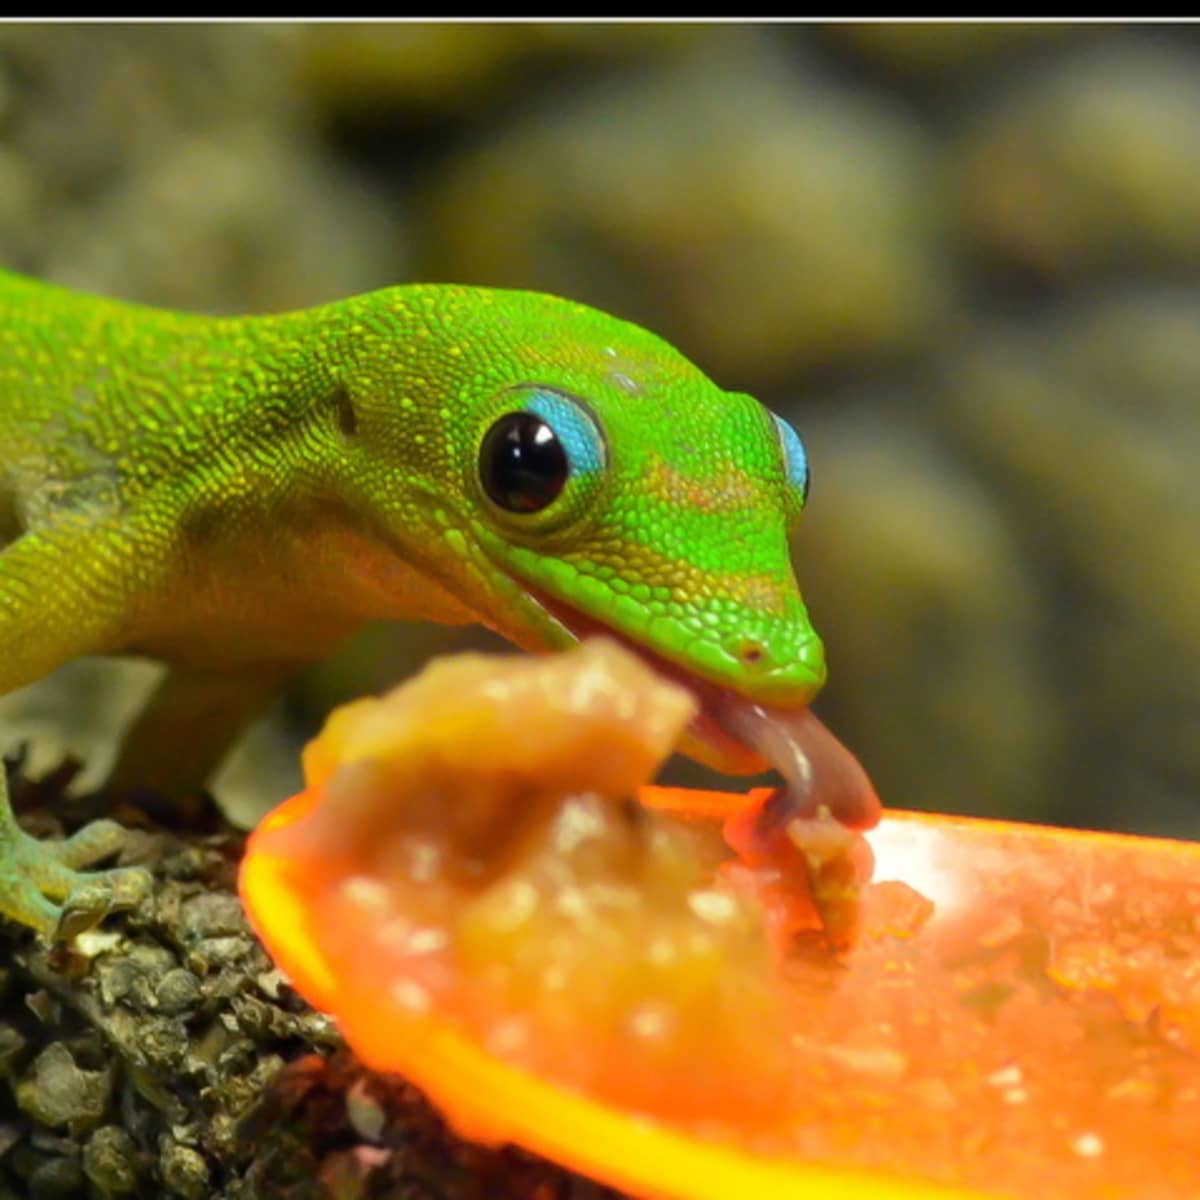 Phelsuma Gecko Species Commonly Available as Pets - HubPages